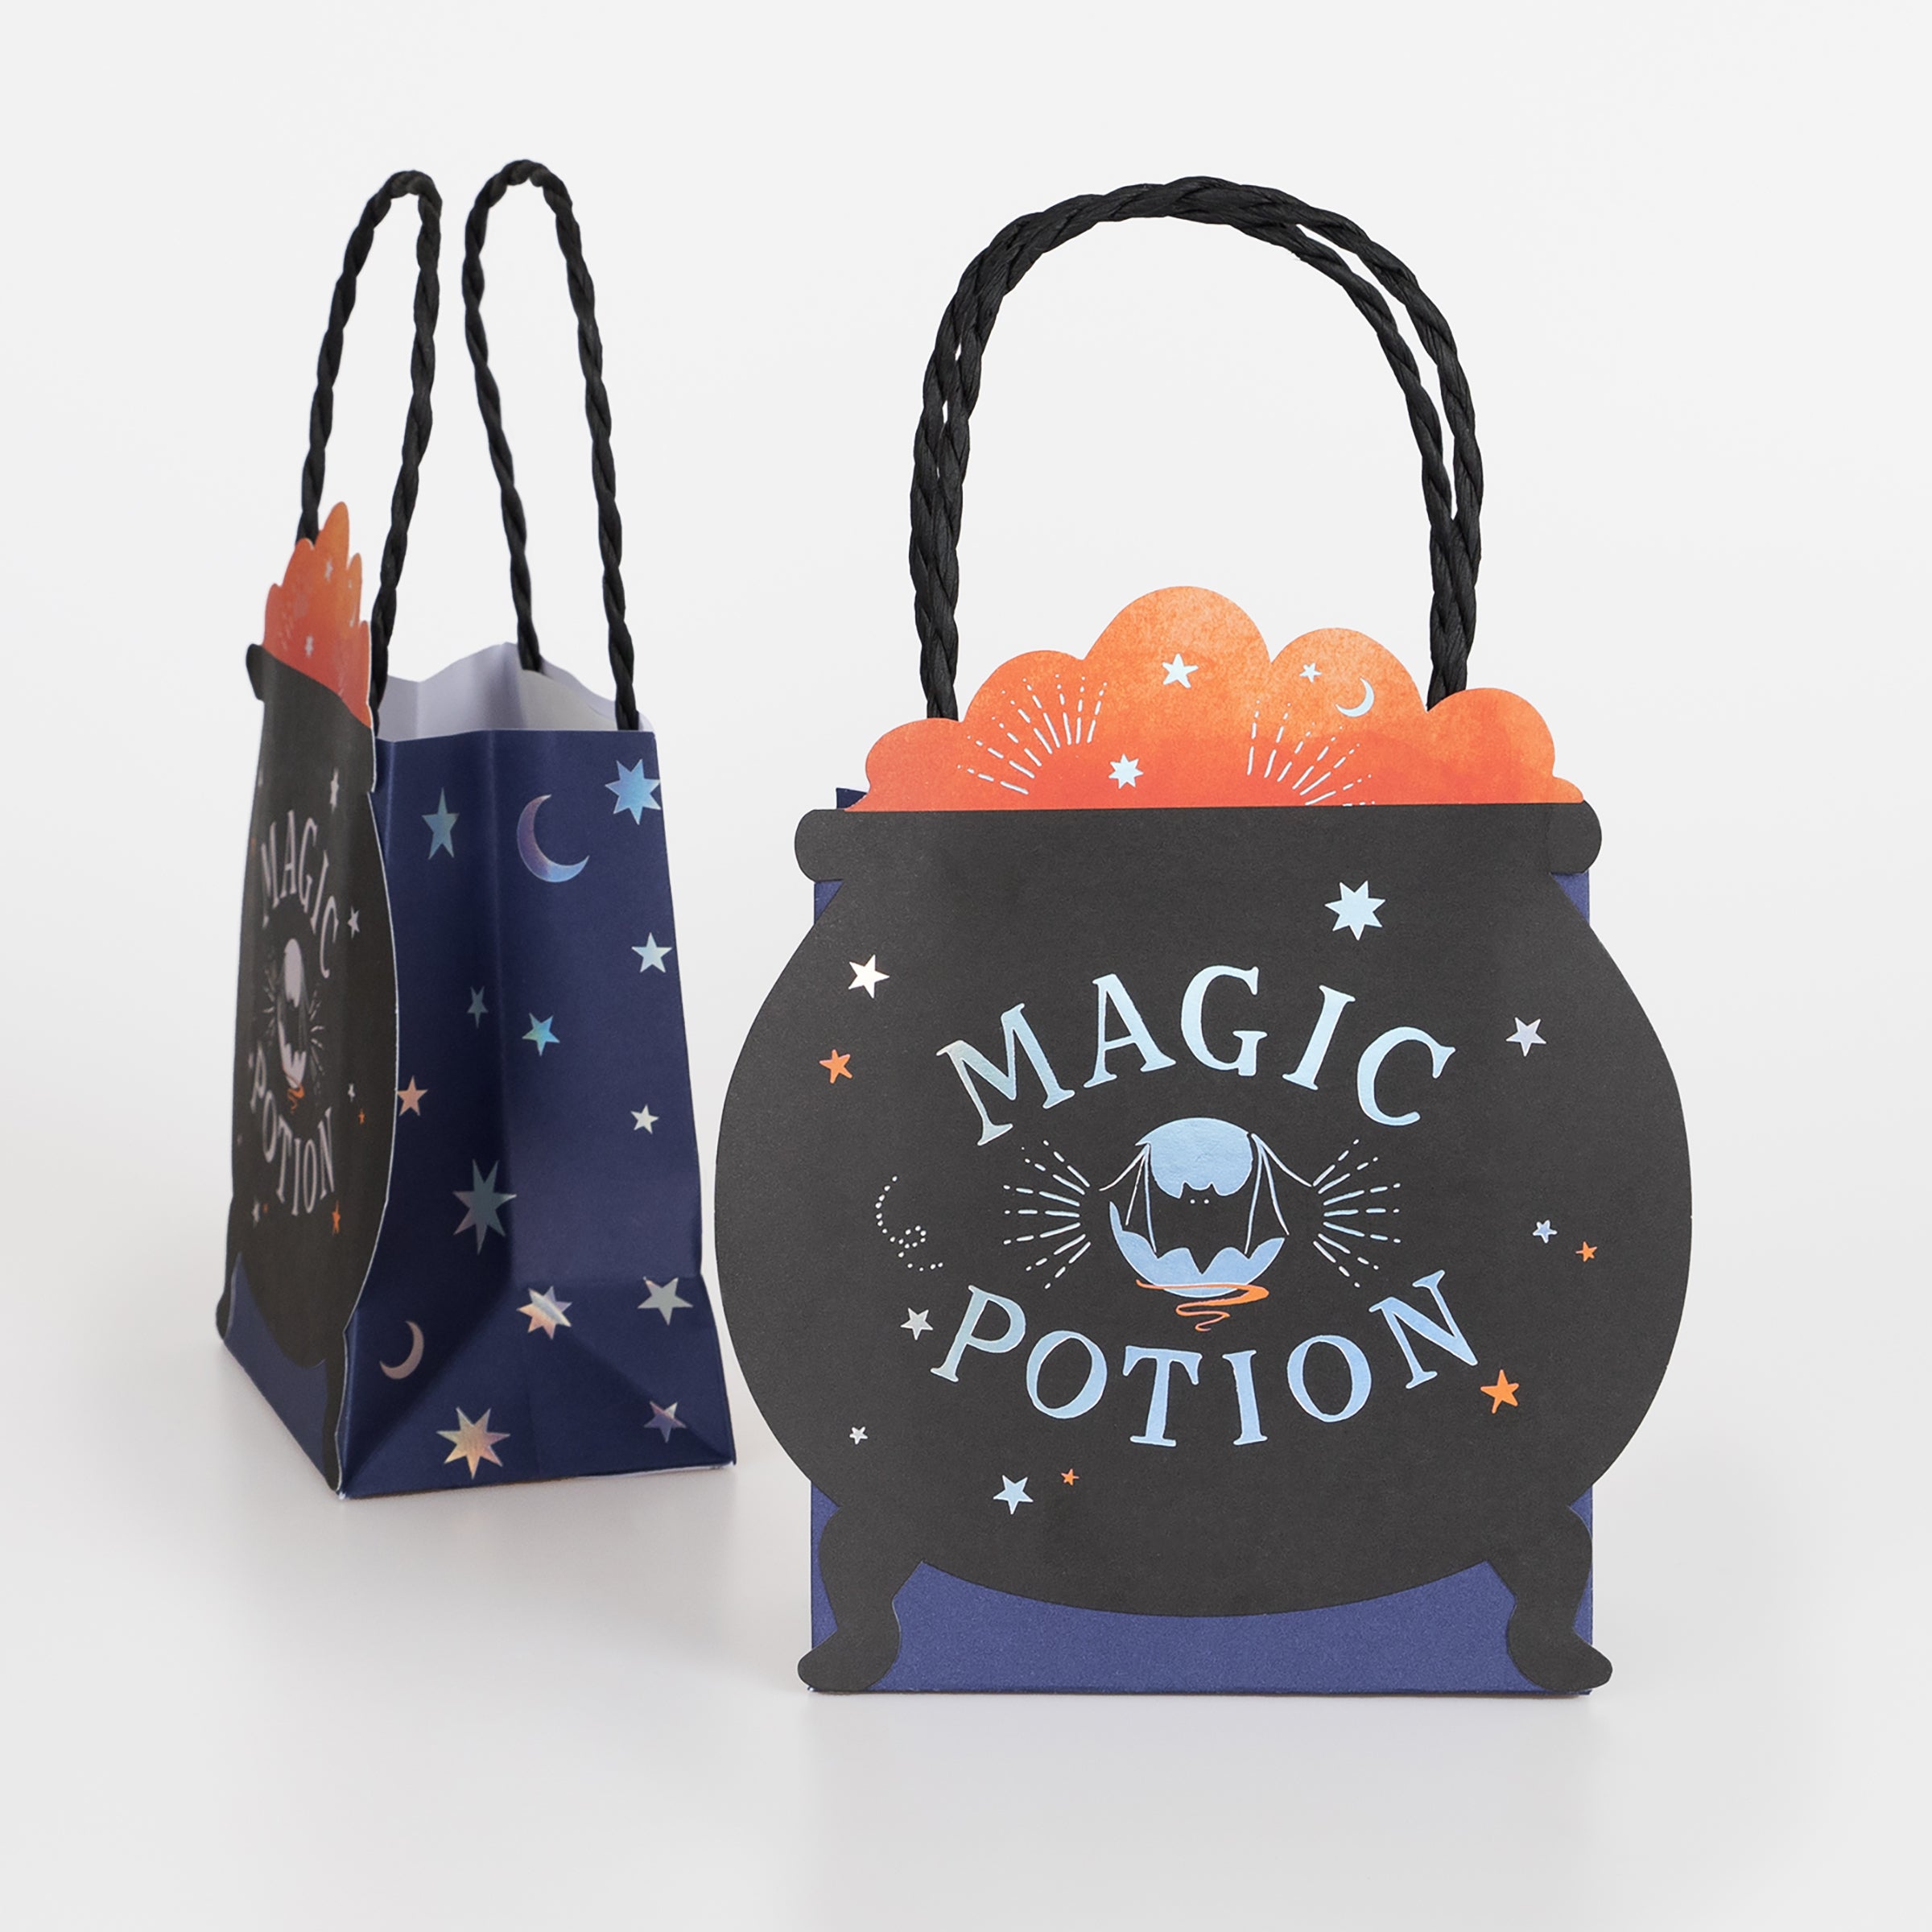 Our magic cauldron bags are perfect if you're looking for Halloween party ideas.